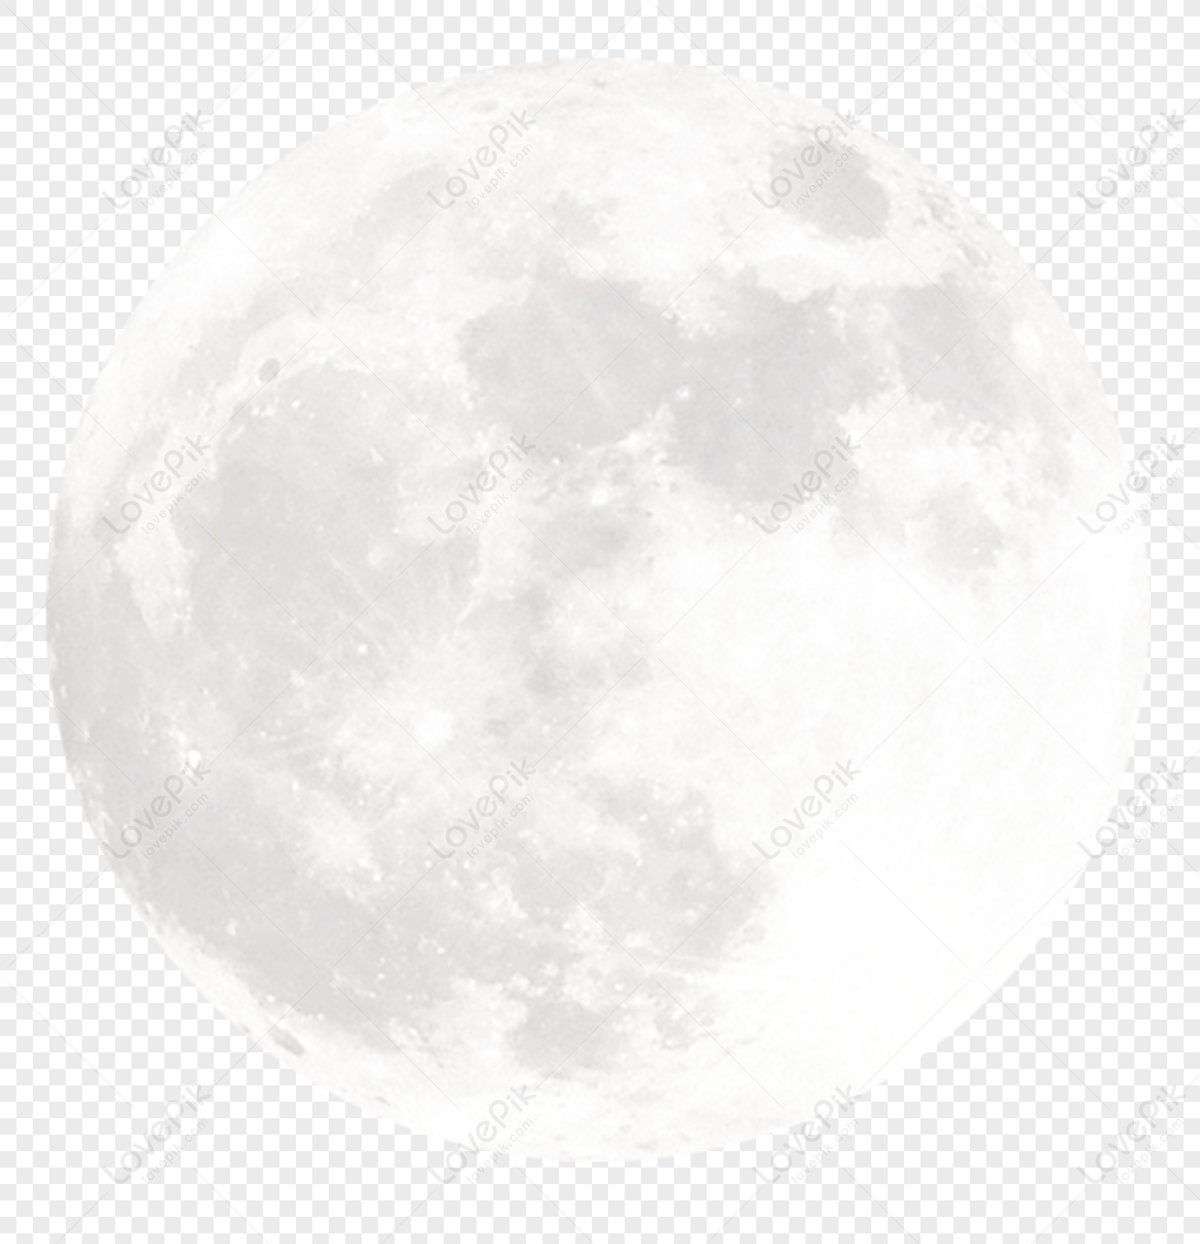 Moon PNG Transparent Background And Clipart Image For Free Download -  Lovepik | 400463870